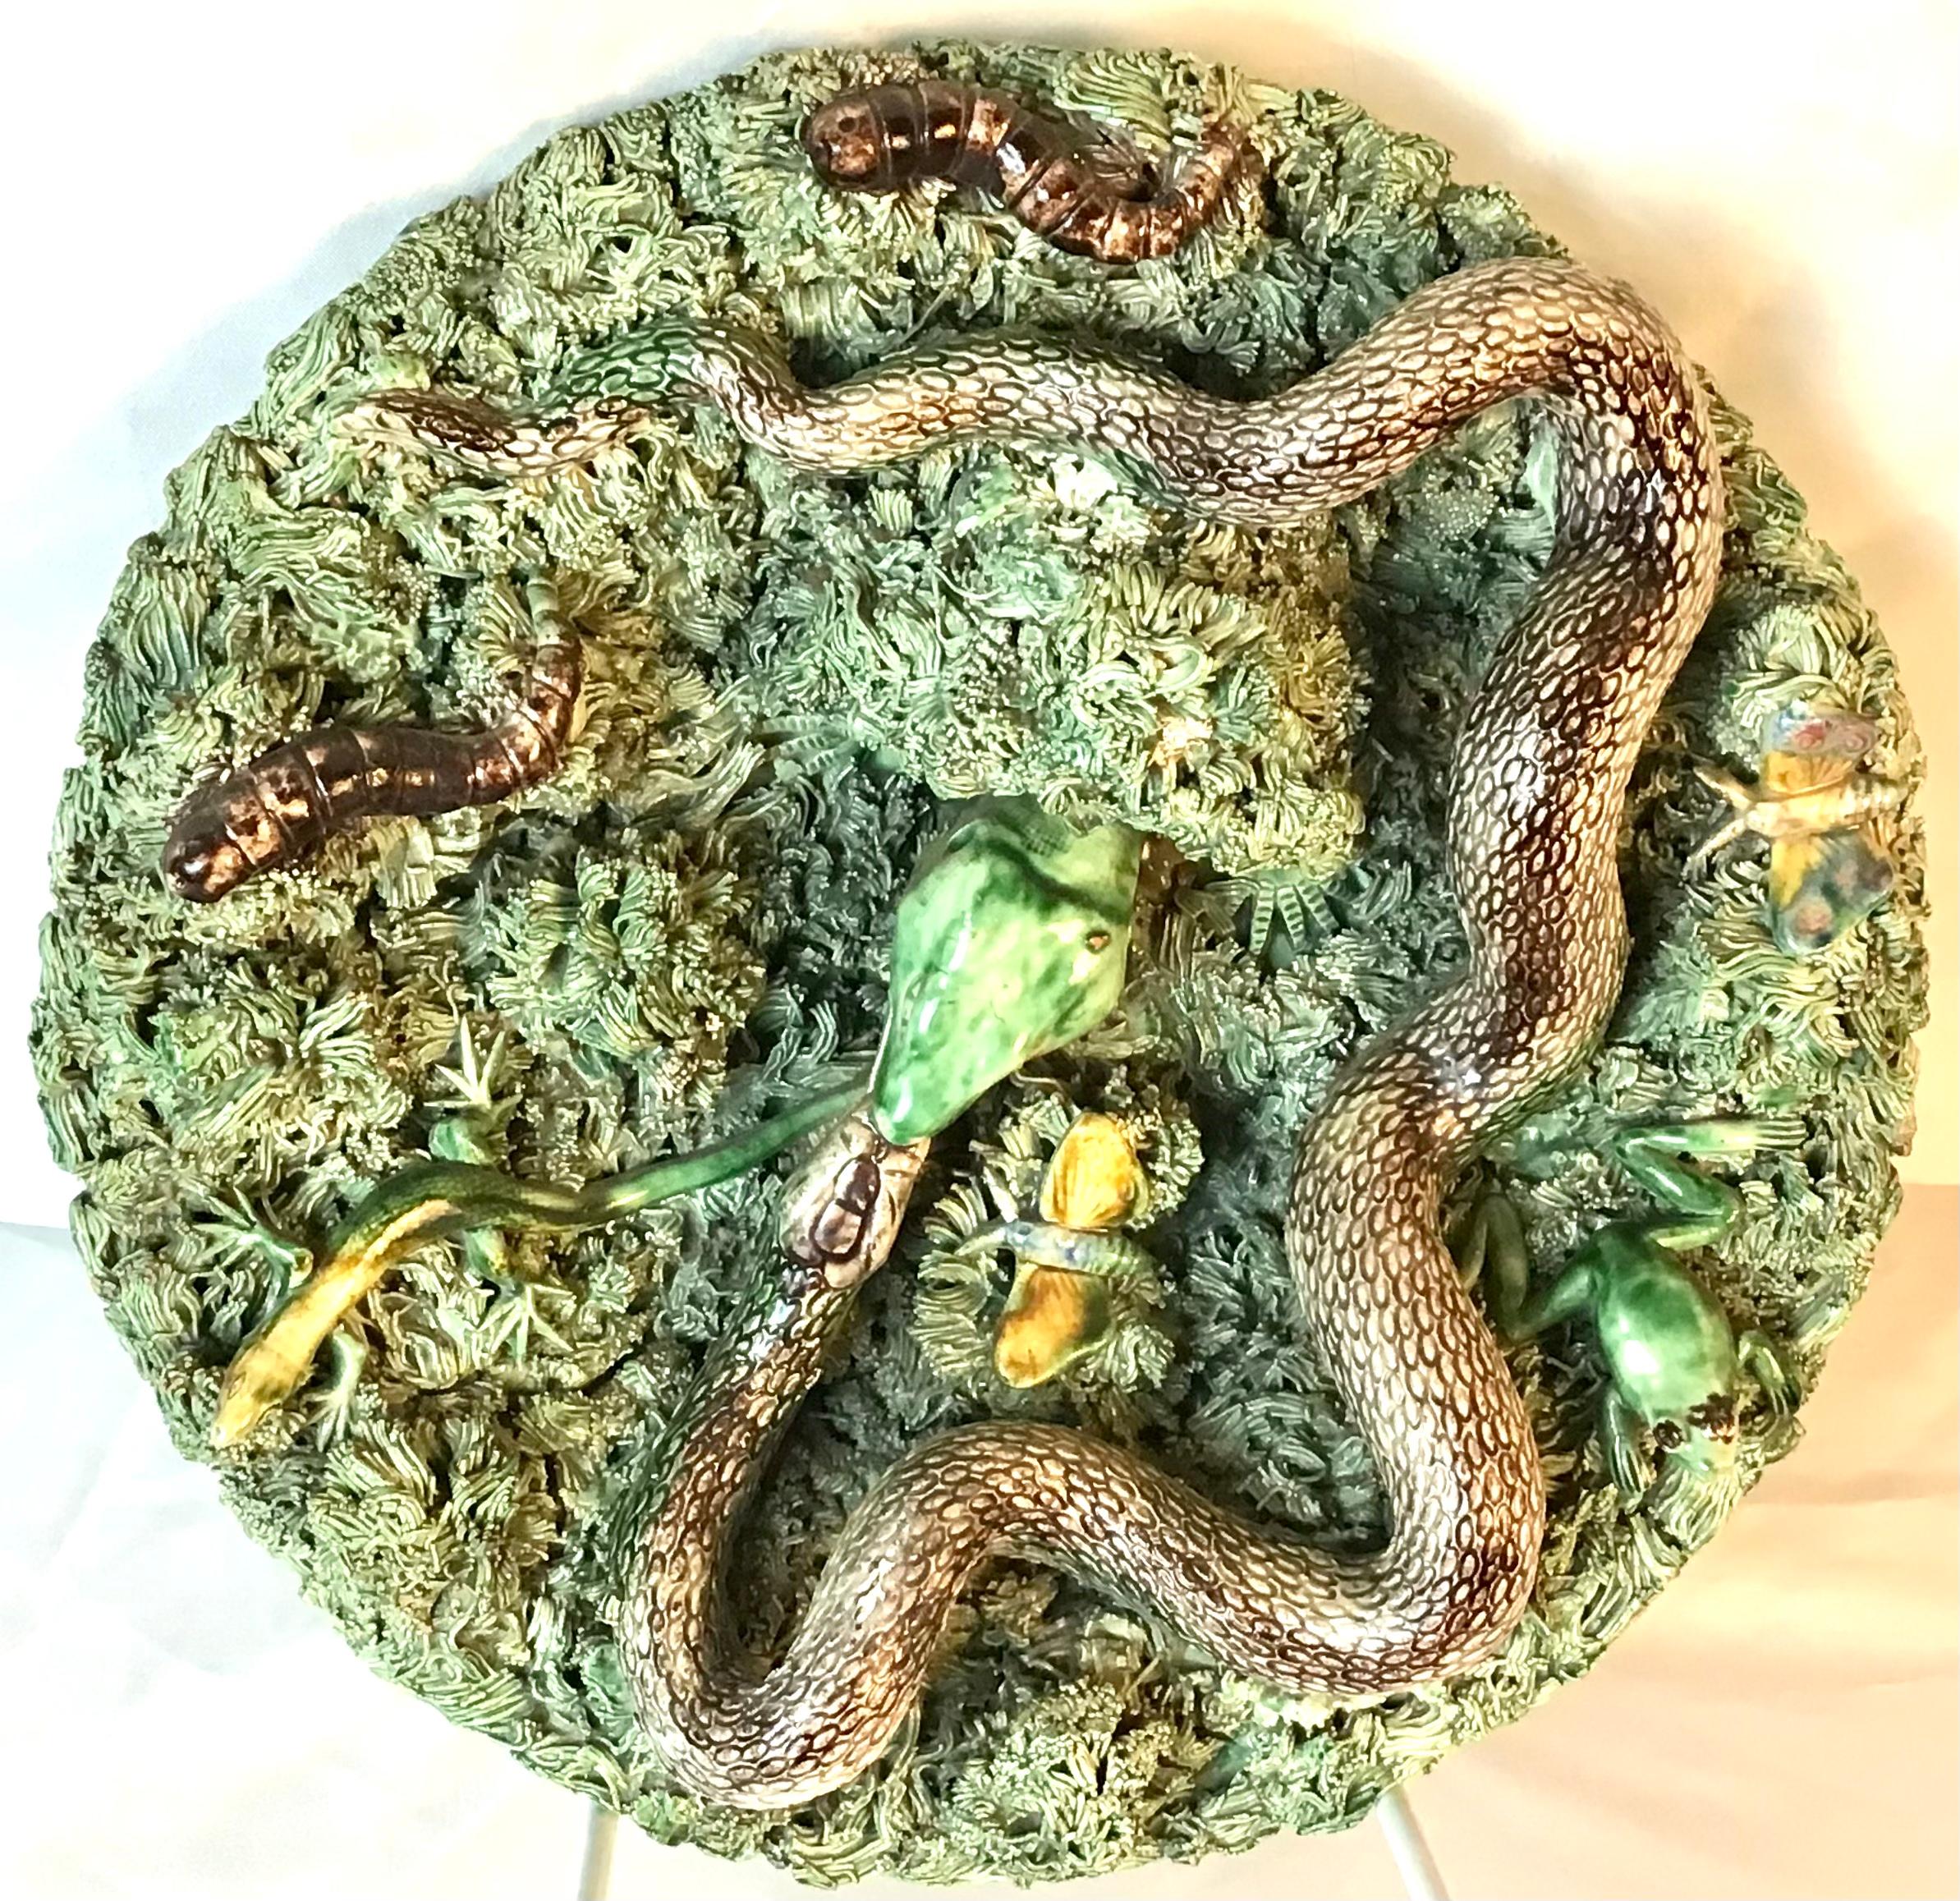 Pottery 19th Majolica Palissy Snake and Lizard Wall Platter Jose Alves Cunha For Sale